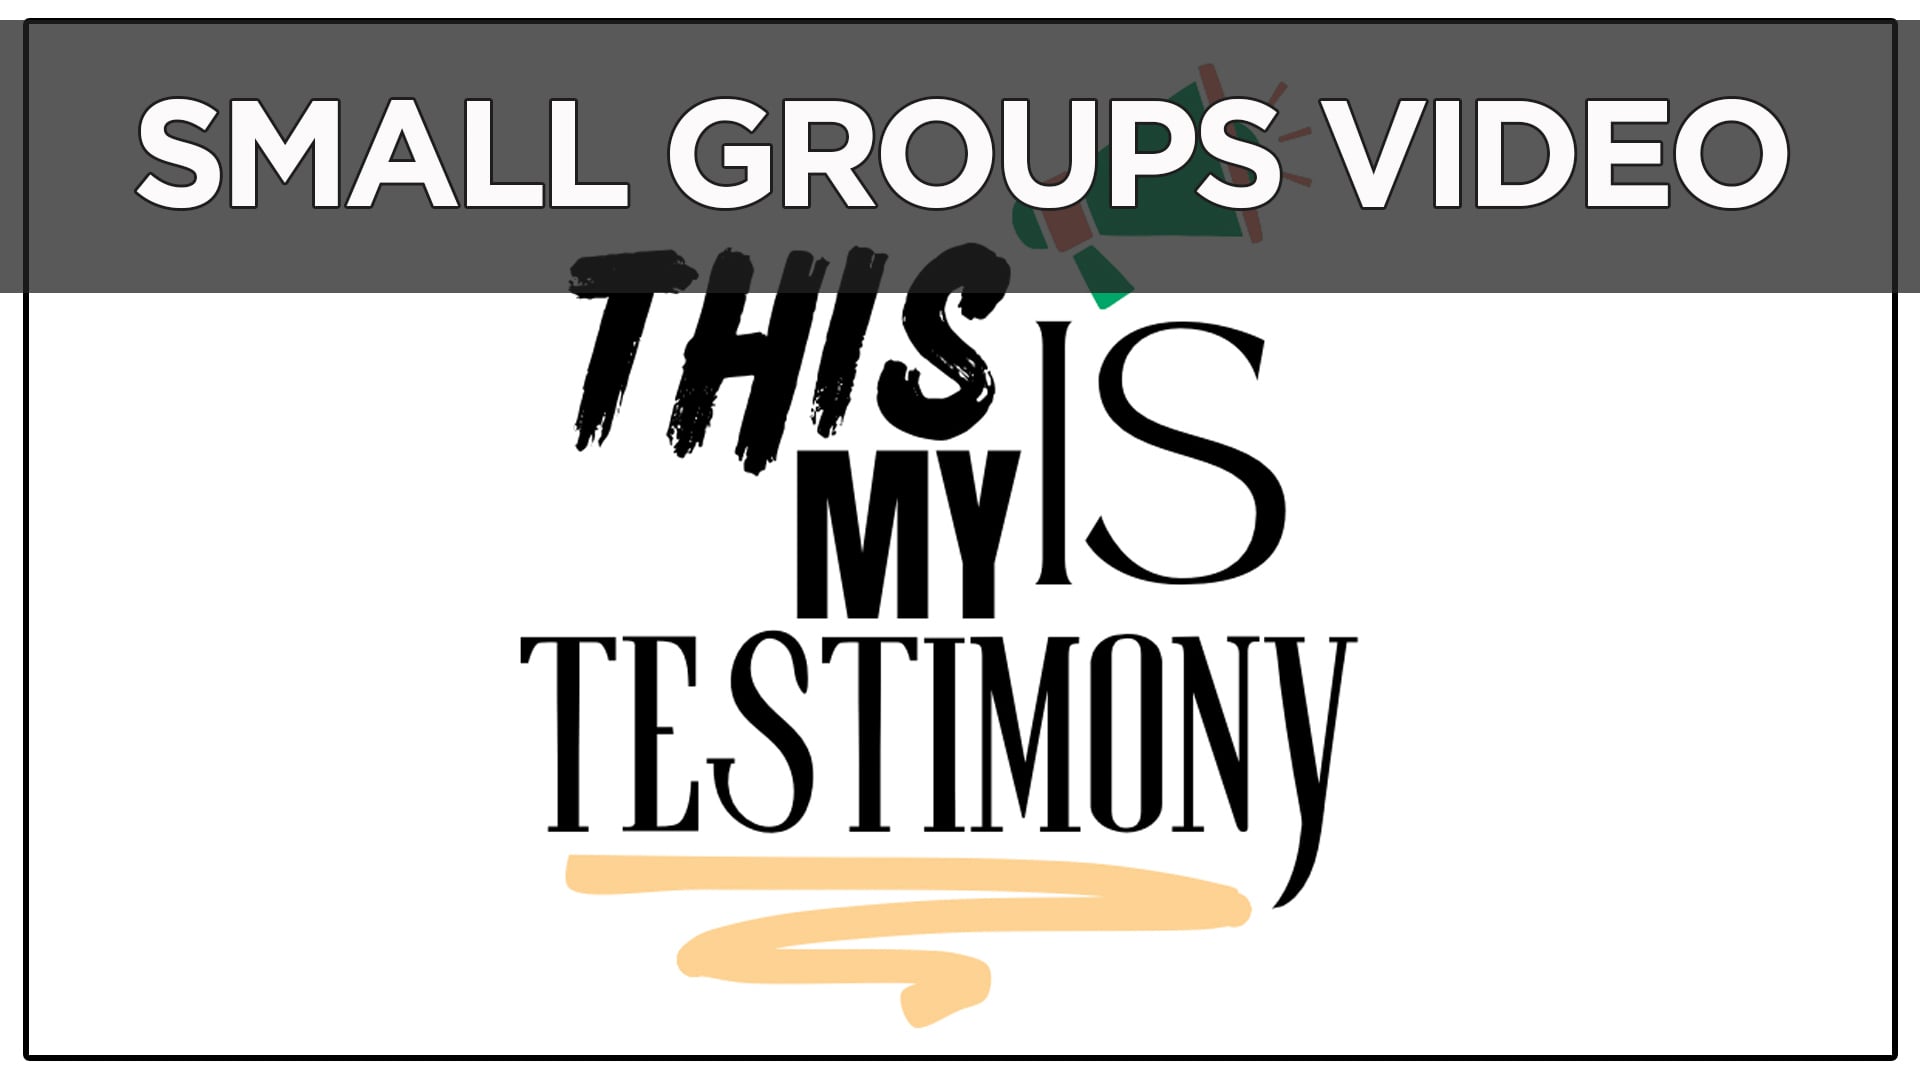 Small Groups Video: 6 Weeks of Testimony - Session 3